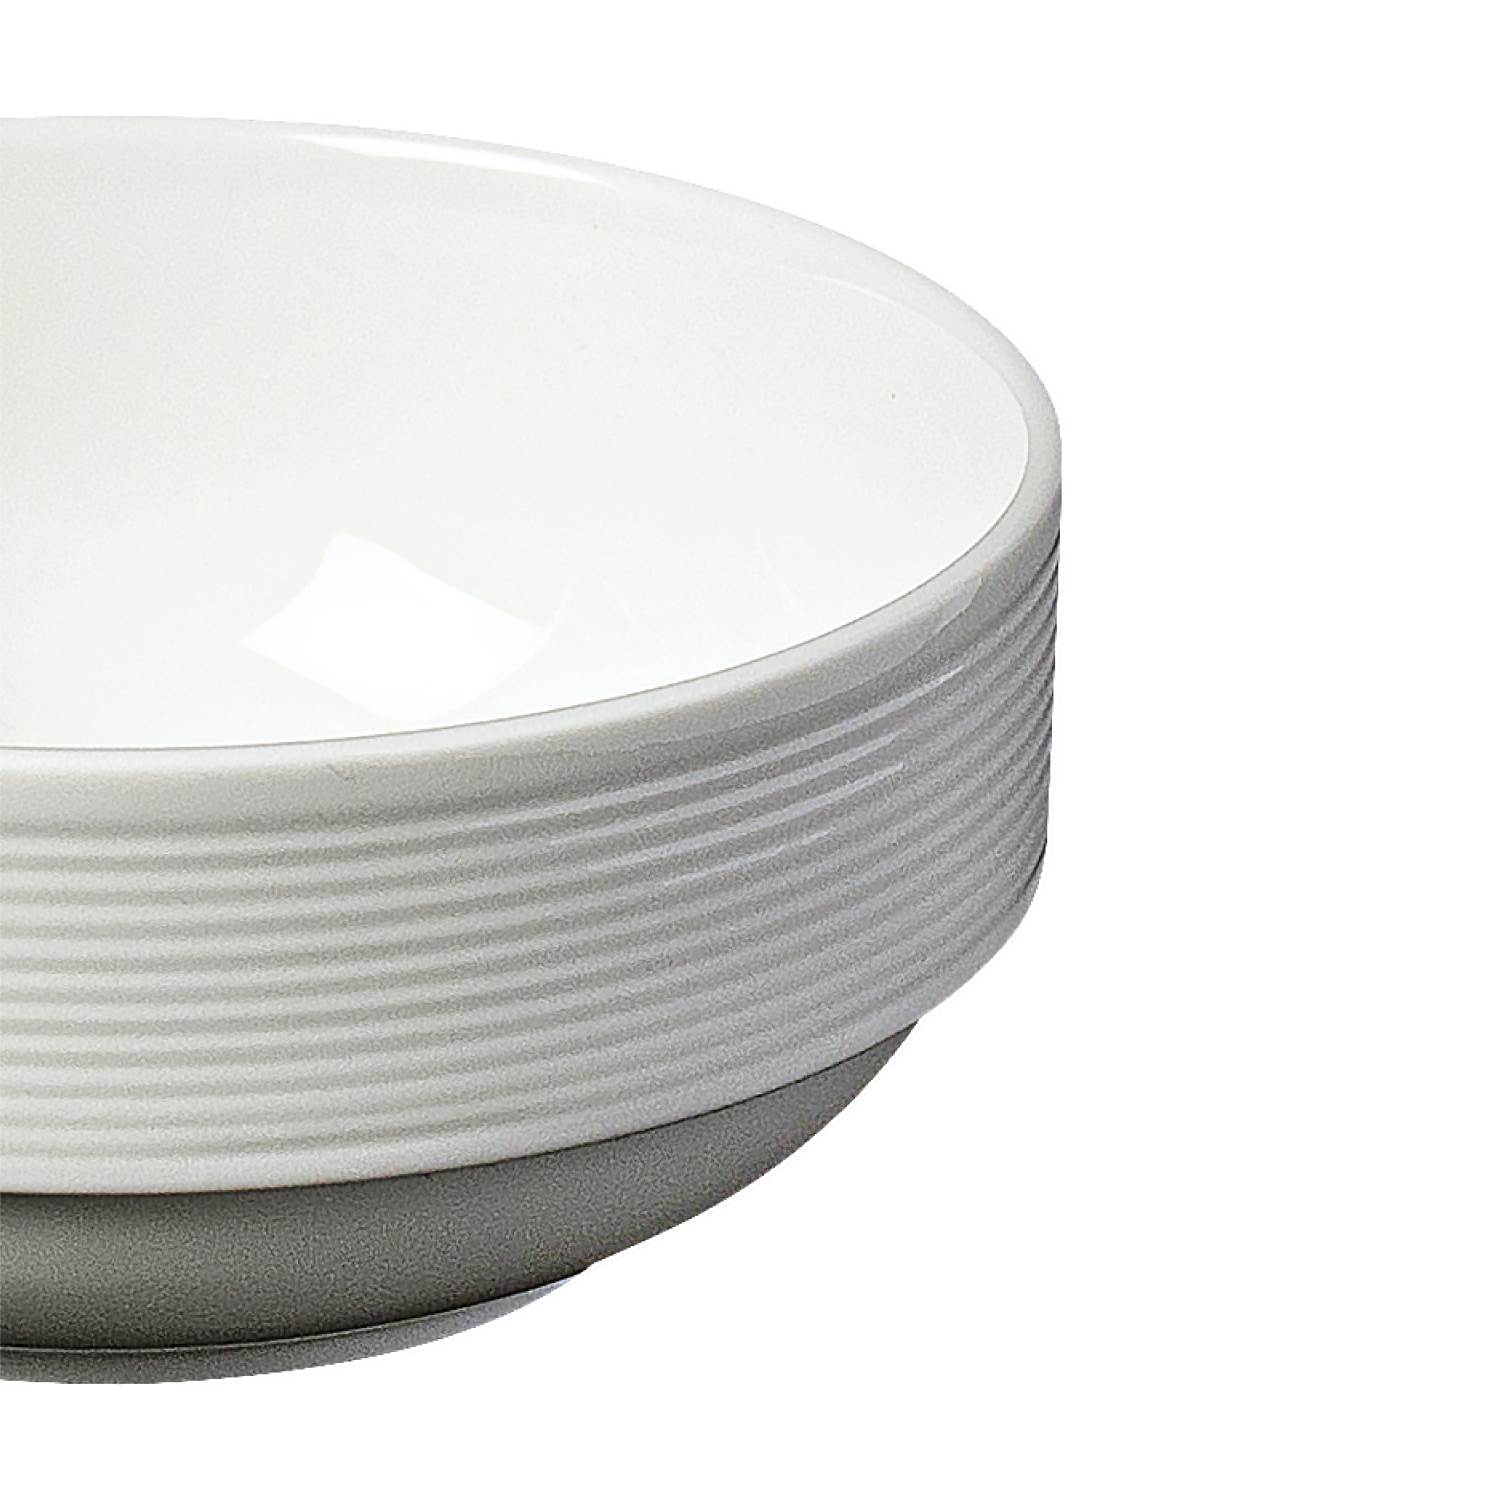 Baralee Wish Stackable Bowl